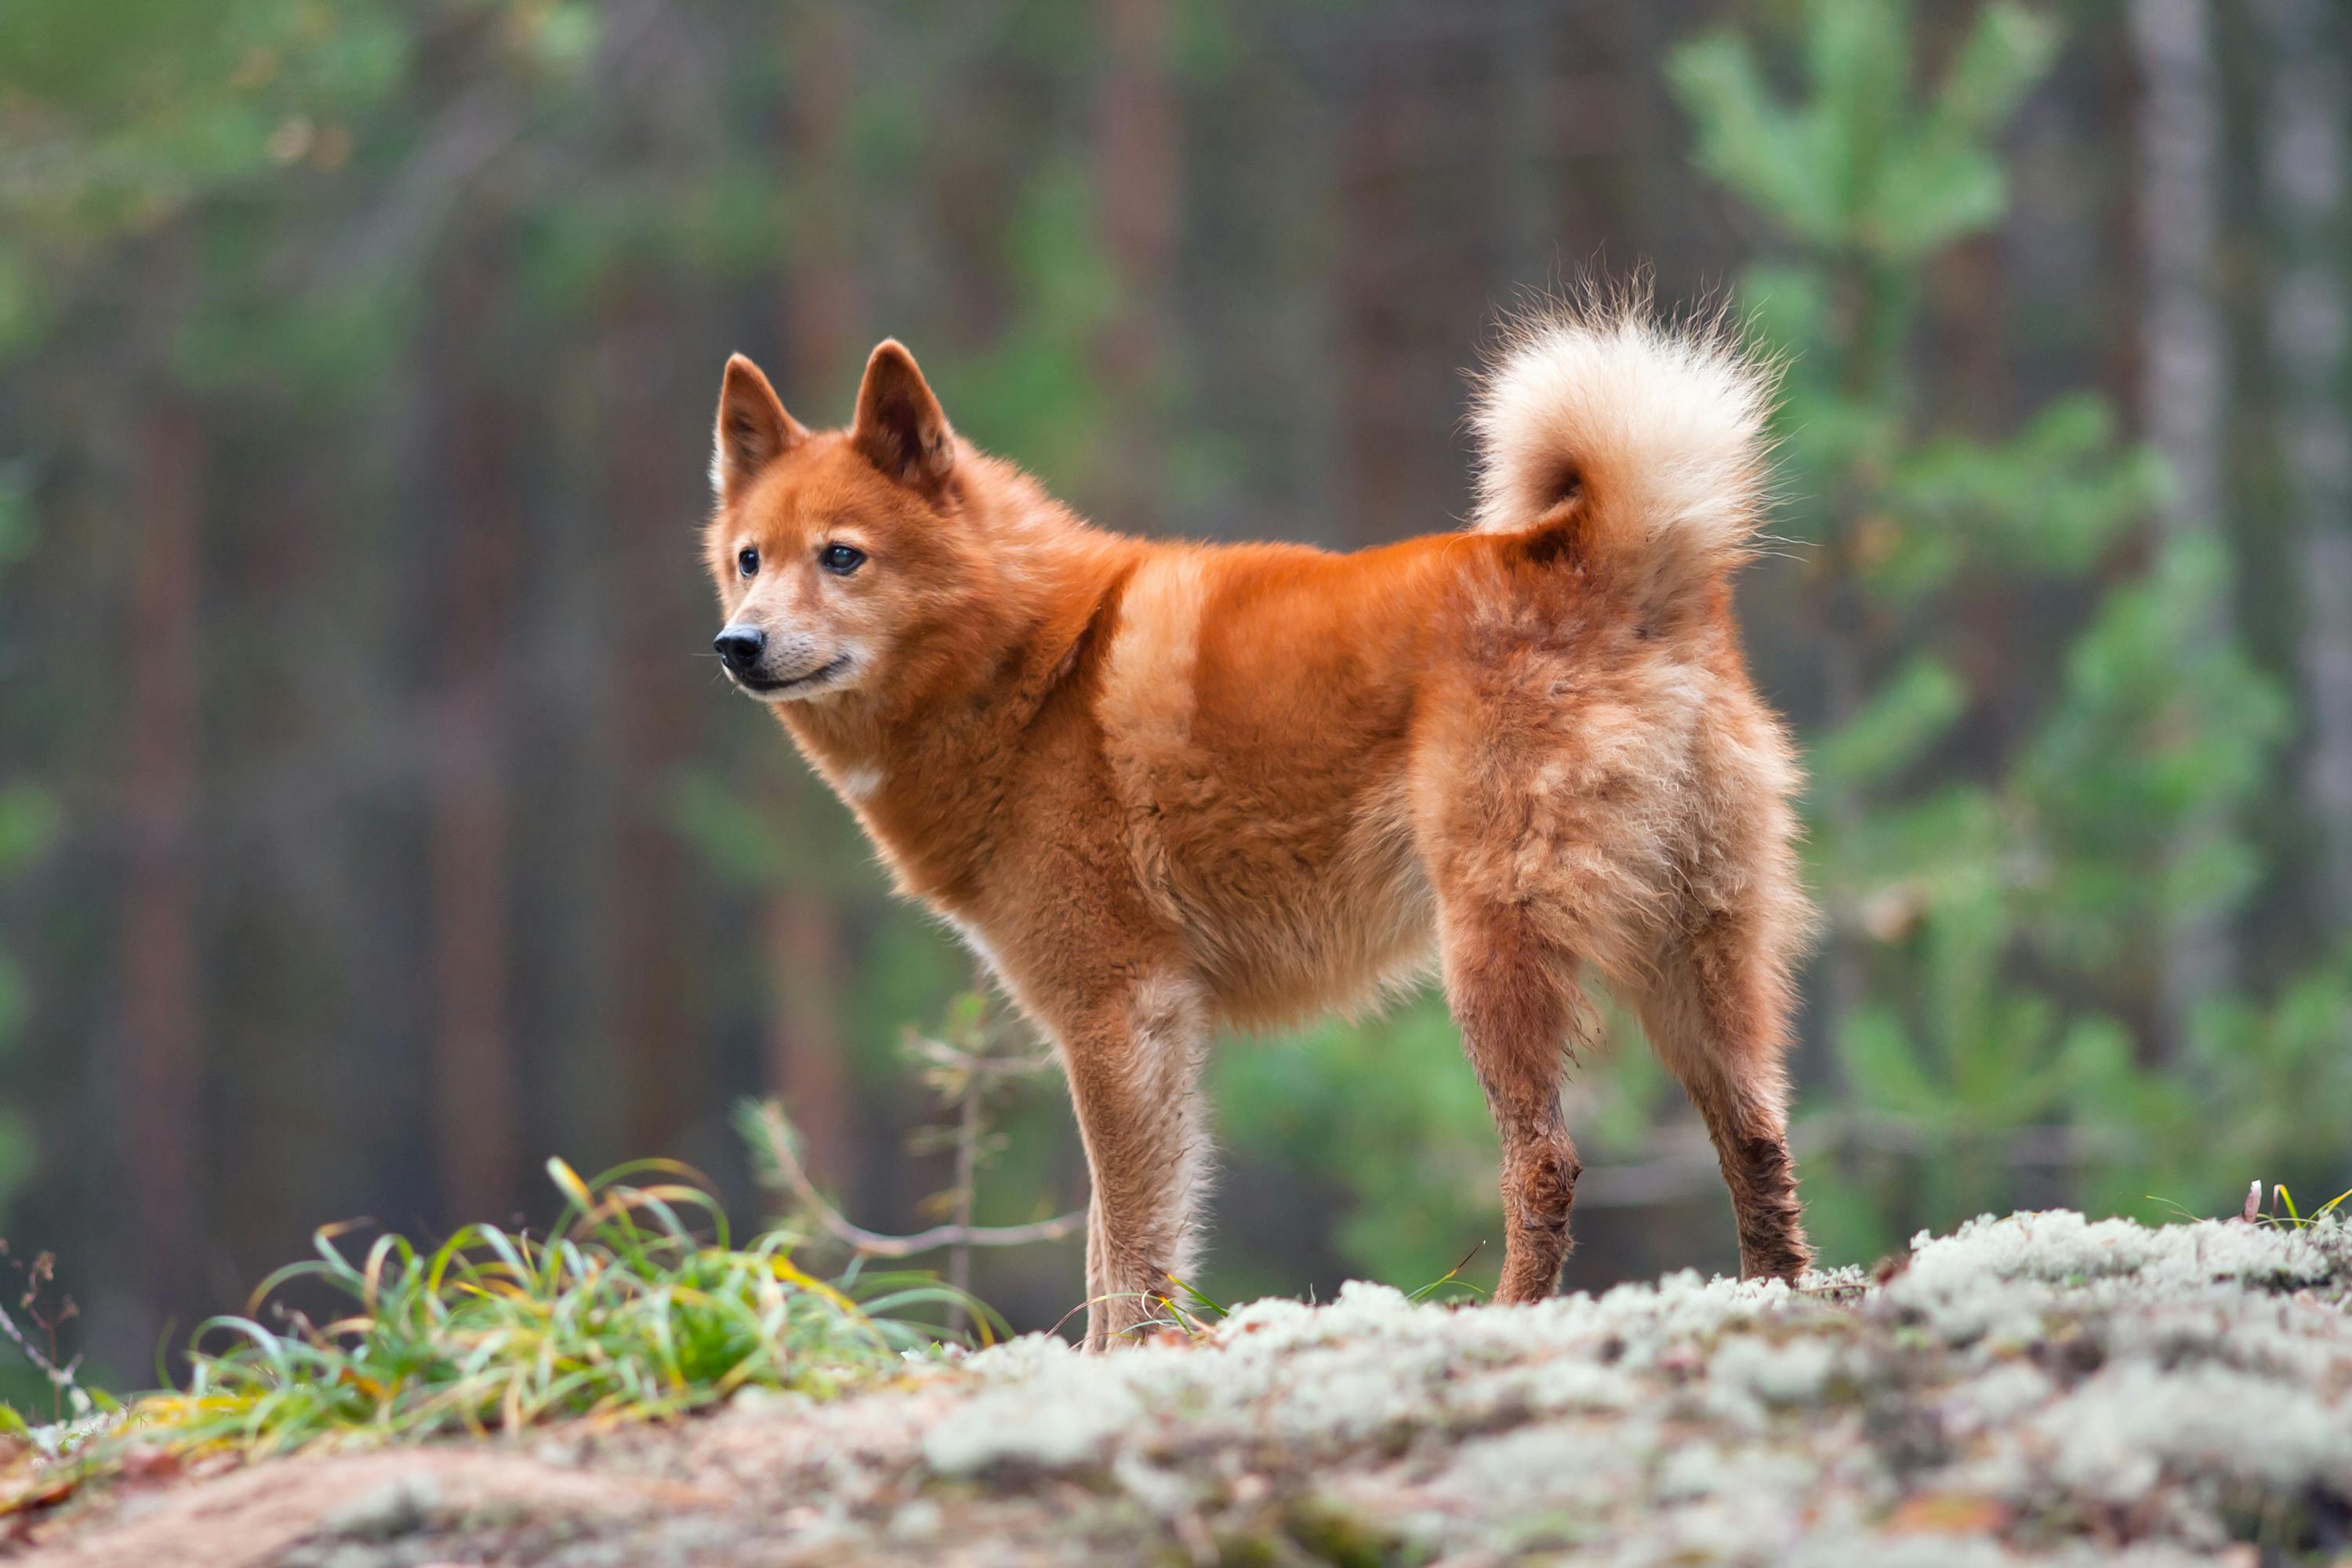 Orange dog with upright ears and a curly tail standing outside